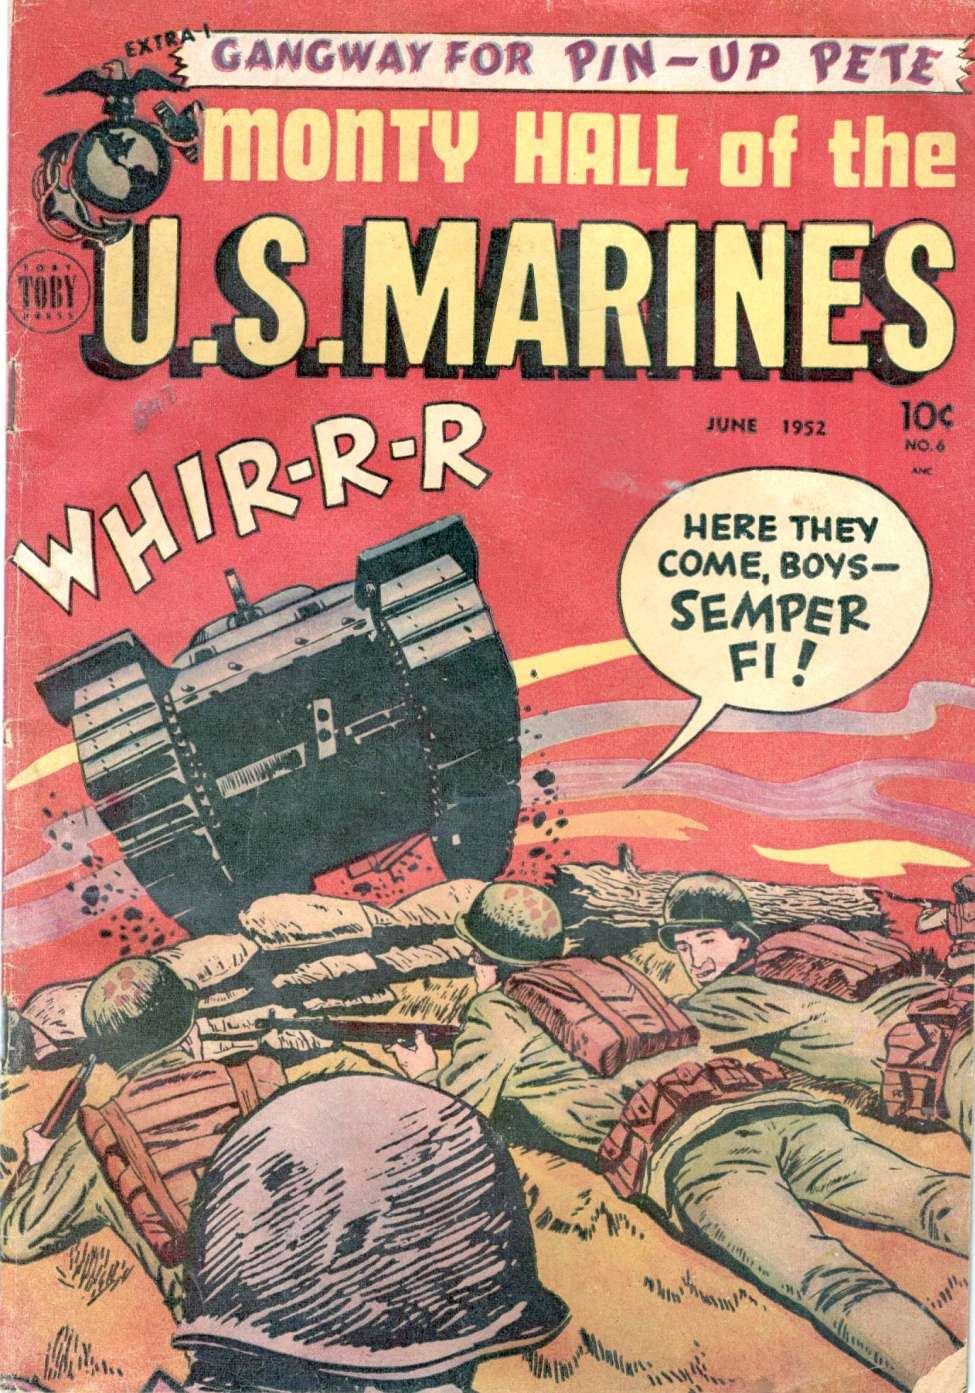 Book Cover For Monty Hall of the U.S. Marines 6